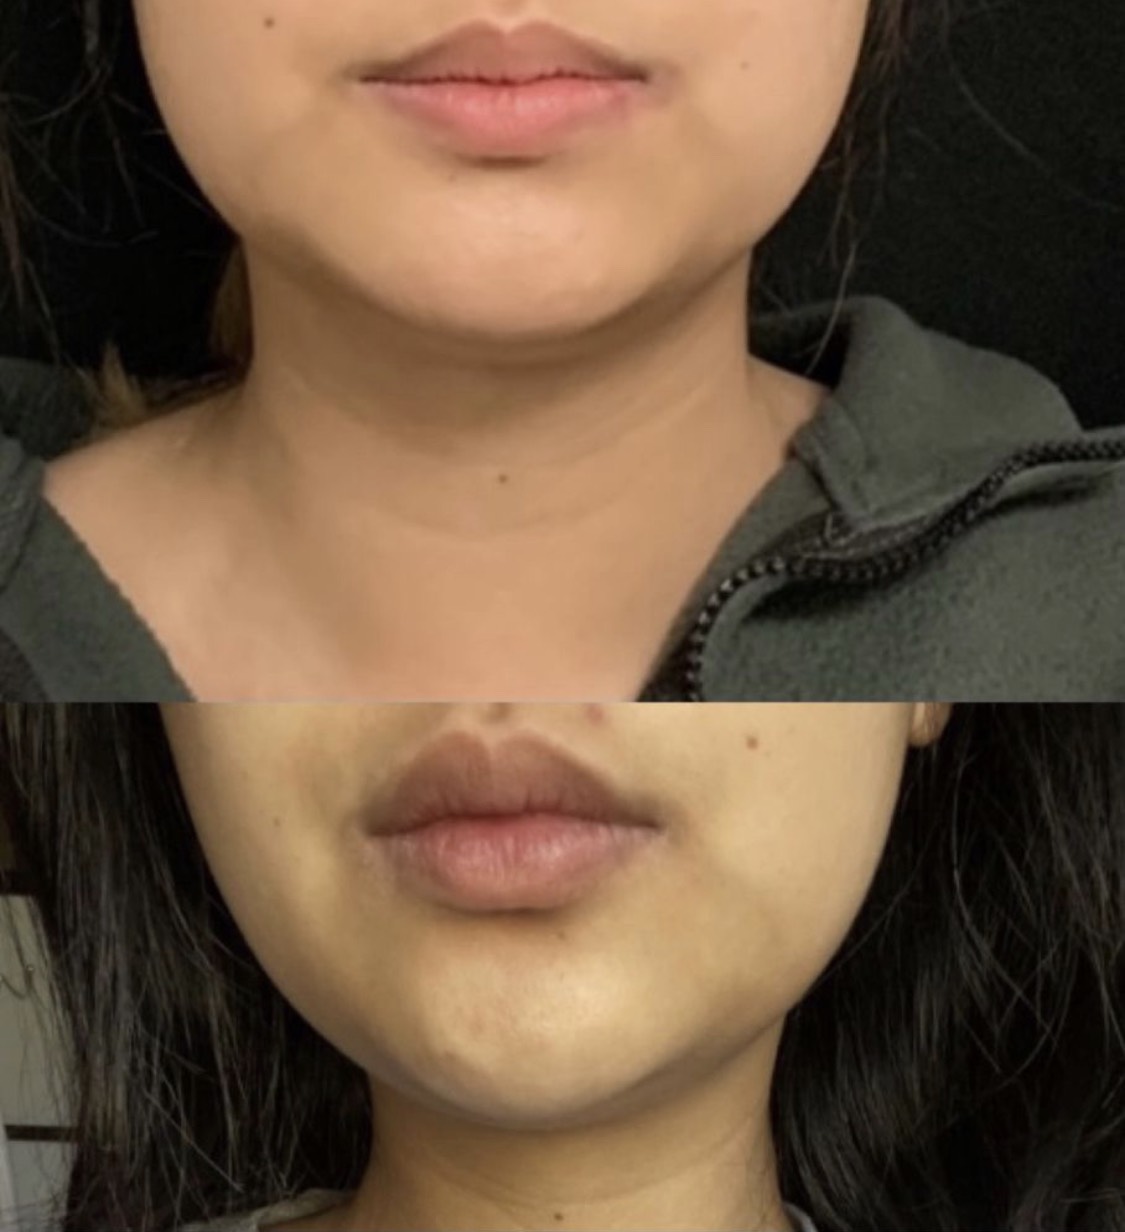 Kybella injection for chin fat pad reduction to improve the chin and jawline profile, after 2 vials 